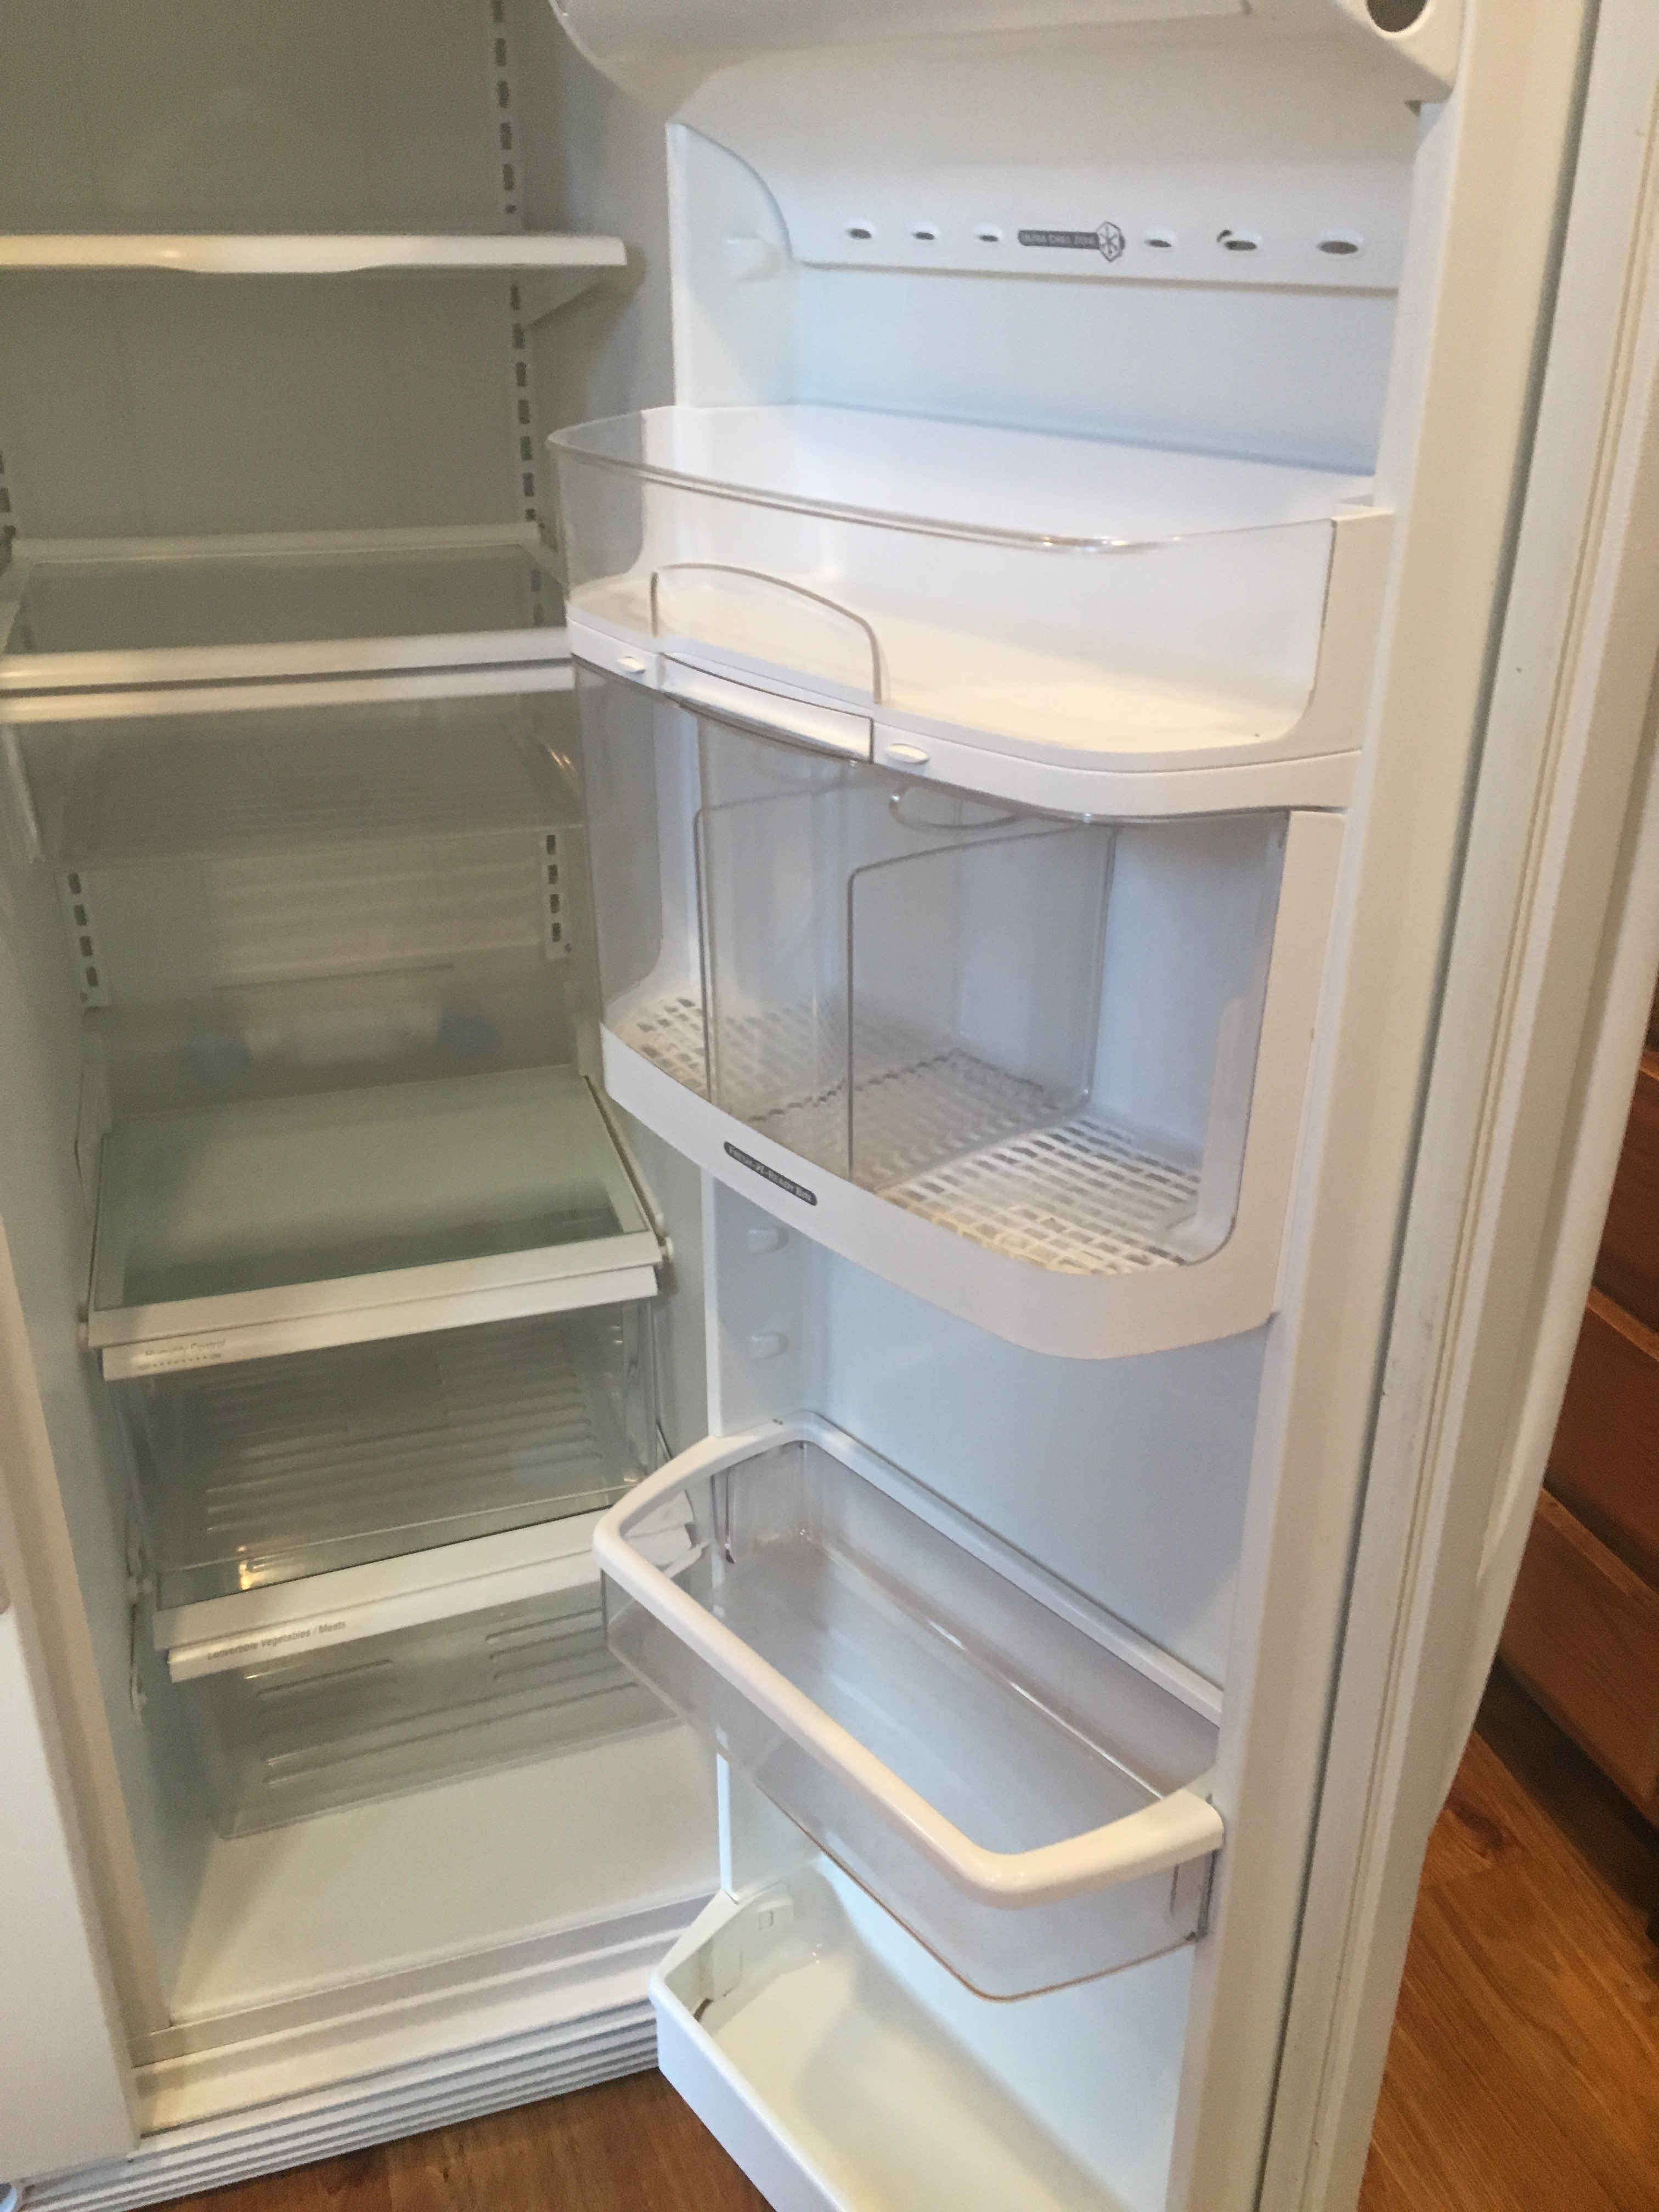 refrigerator after being cleaned